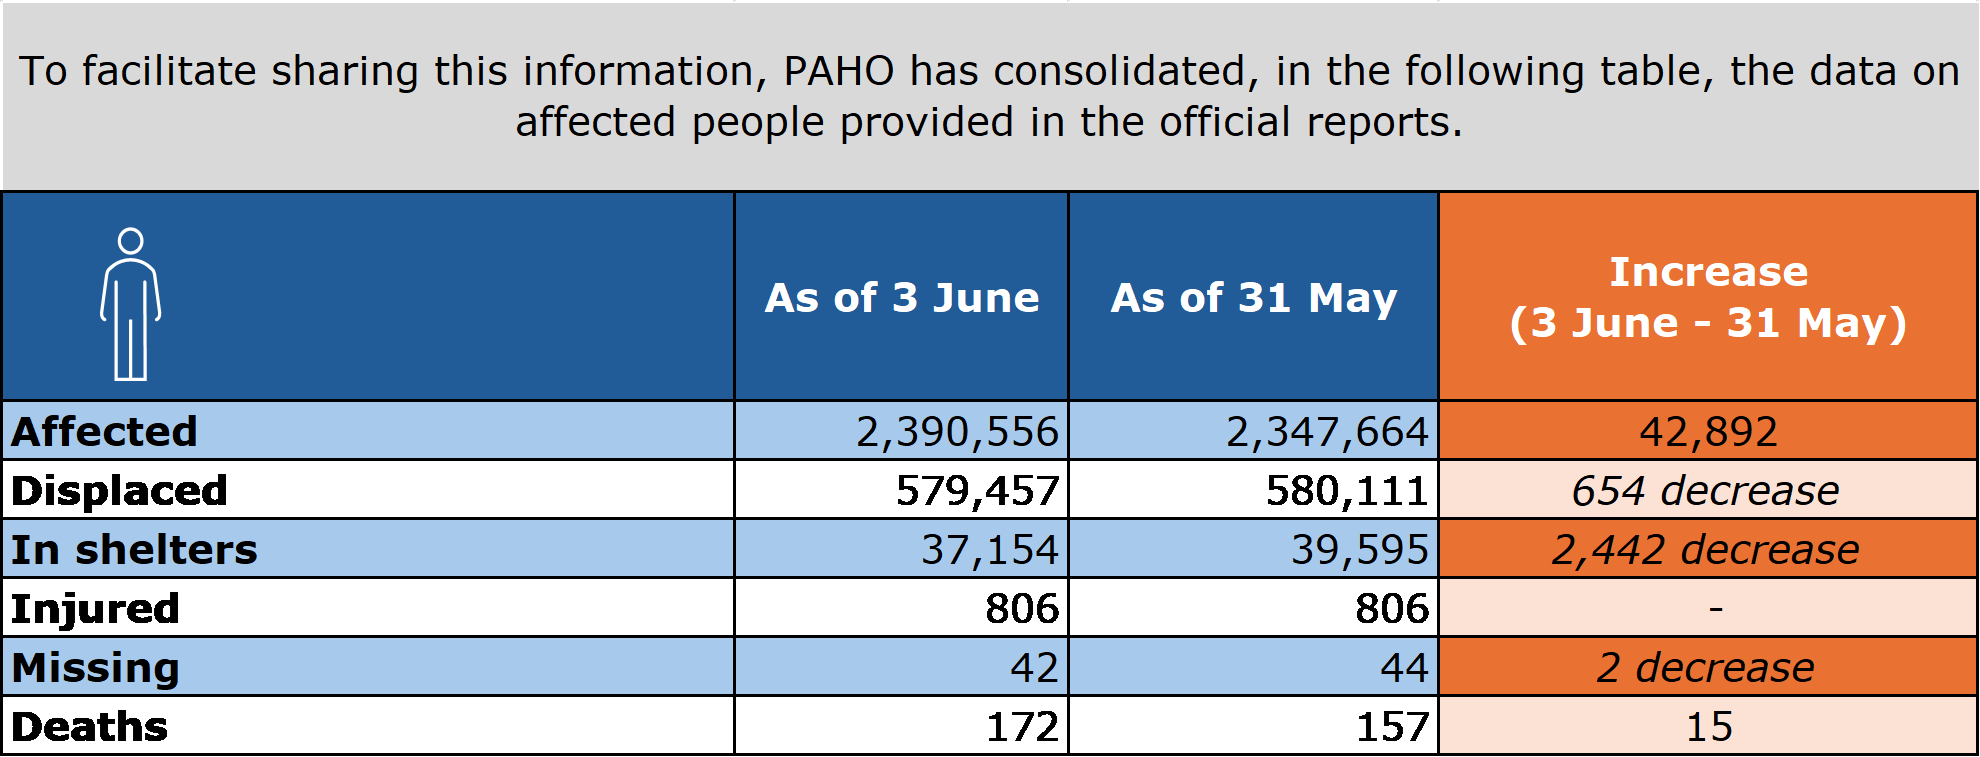 Table: Data on affected people. This information can be found in the official report